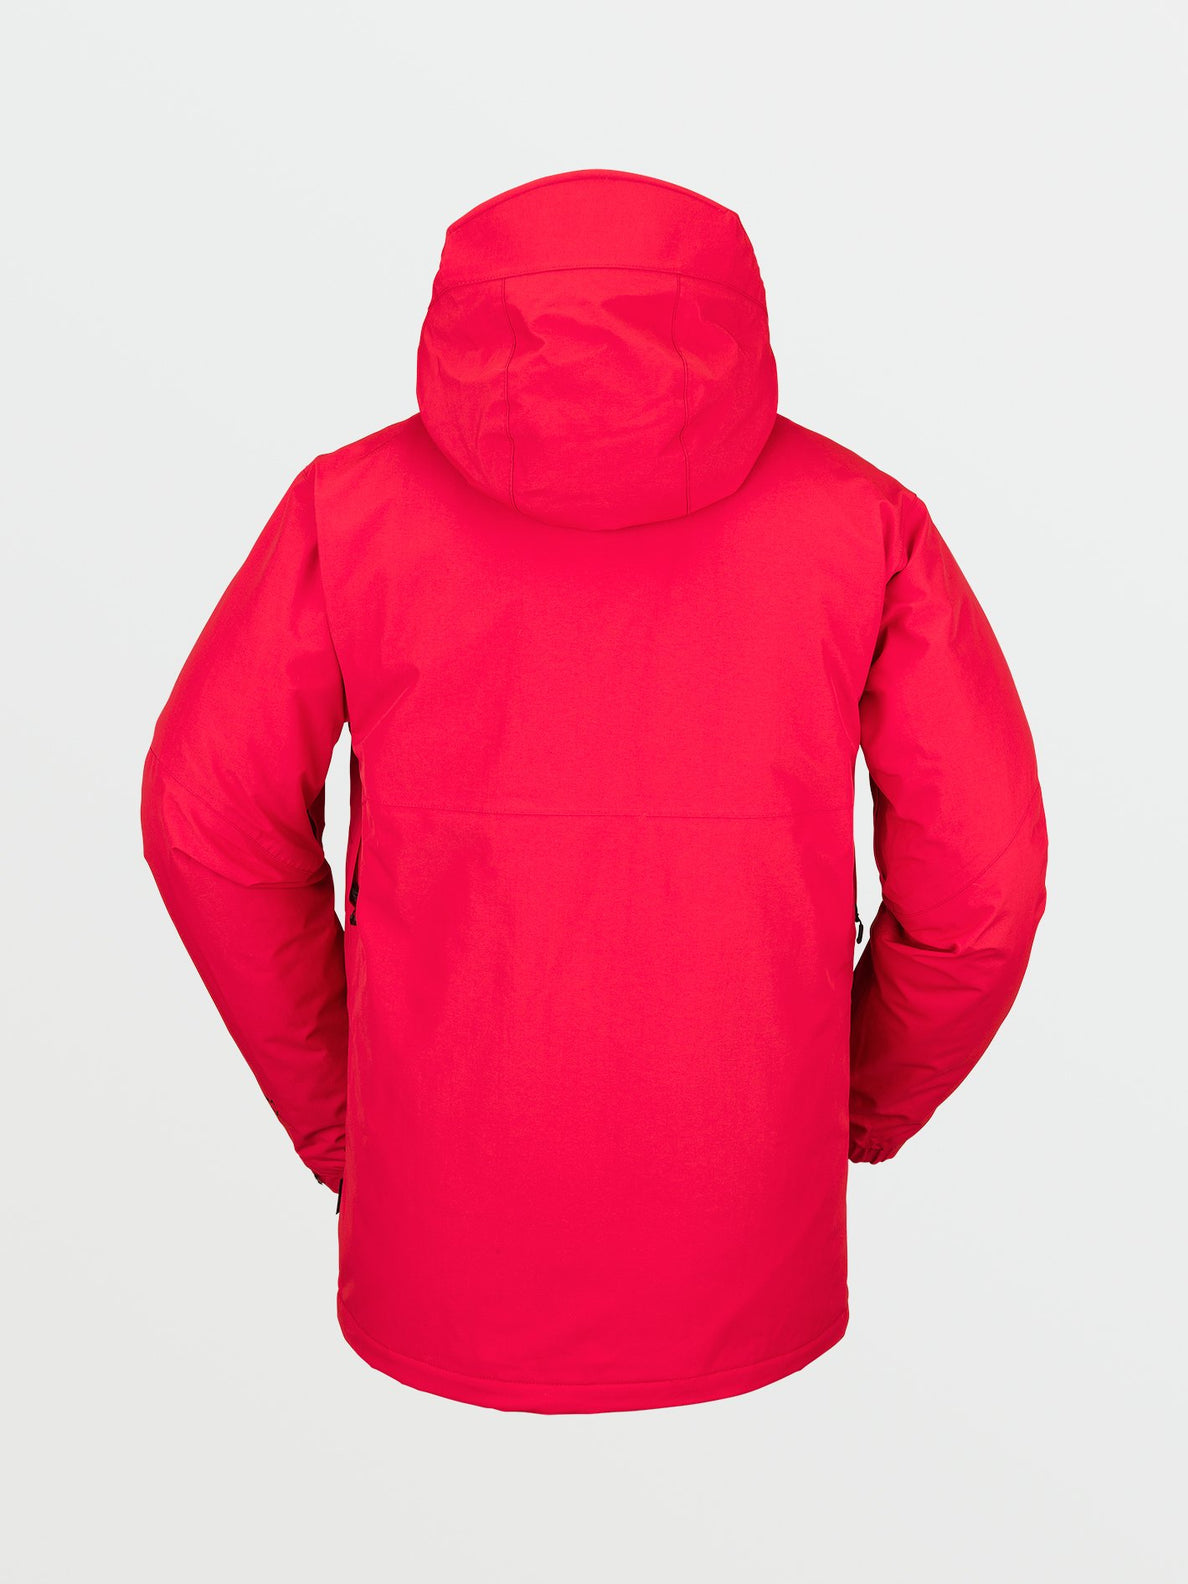 L Insulated Gore-Tex Jacket - RED (G0452211_RED) [B]